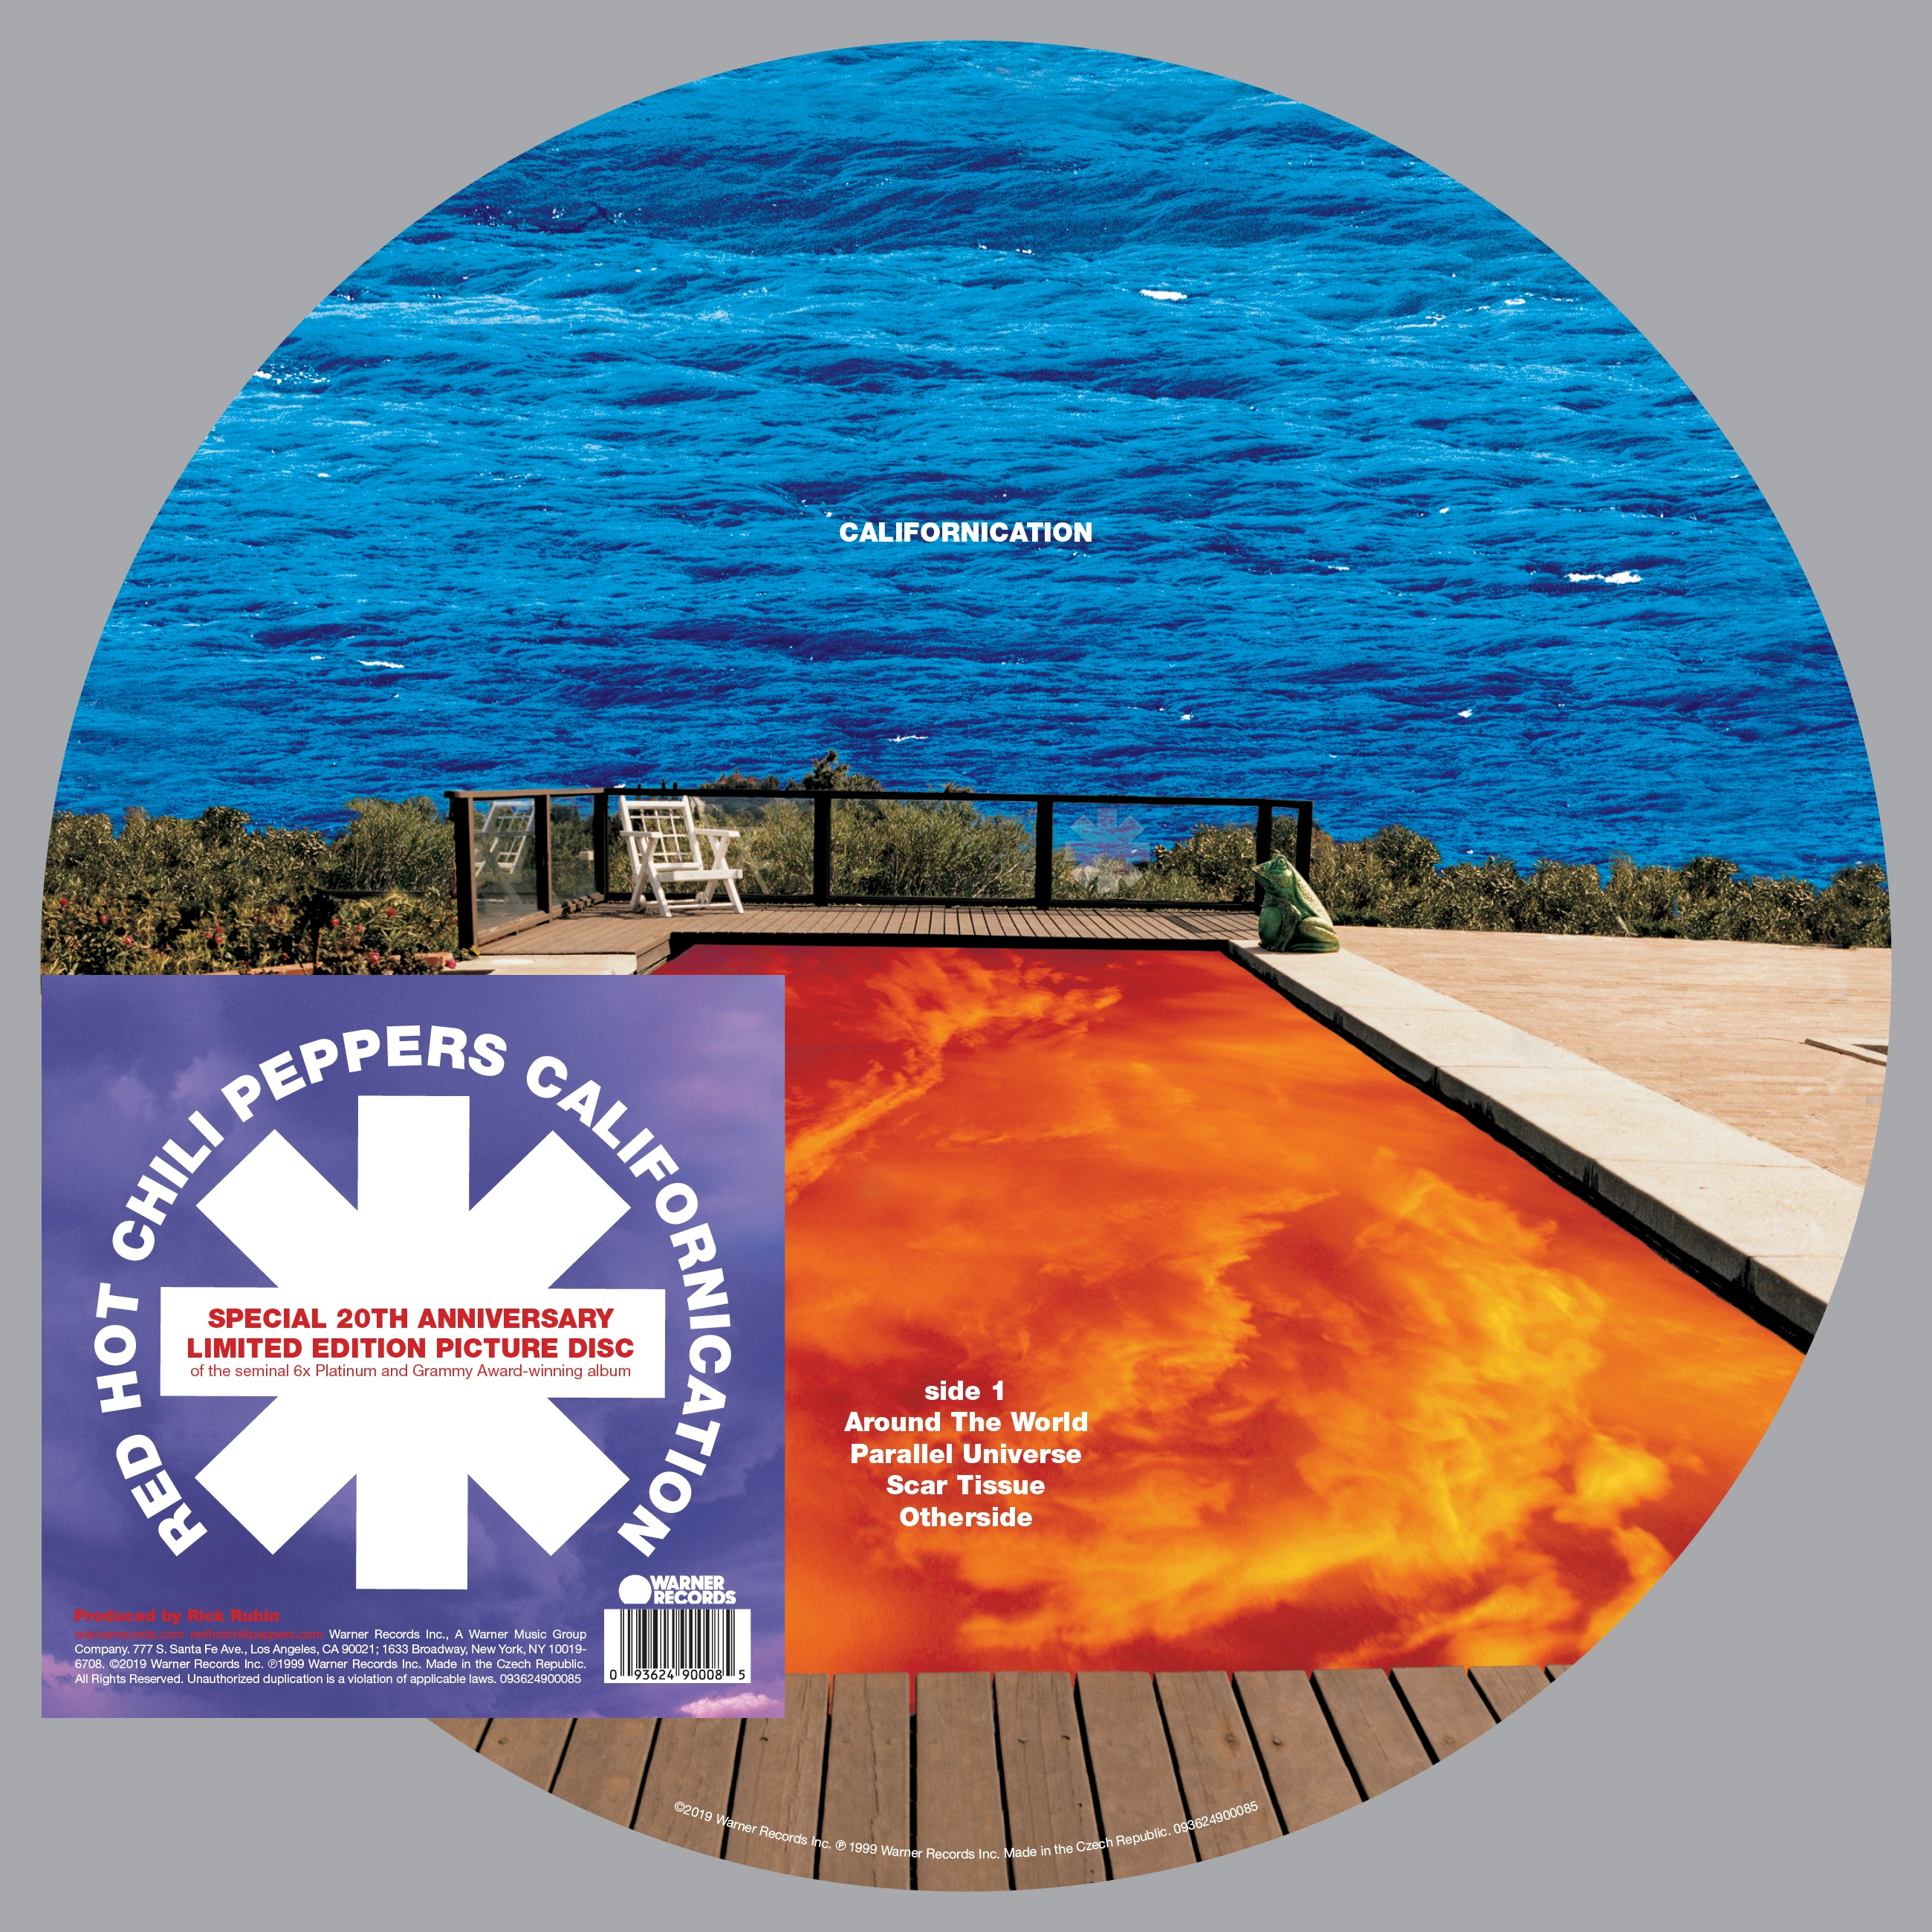 Album artwork for Californication by Red Hot Chili Peppers